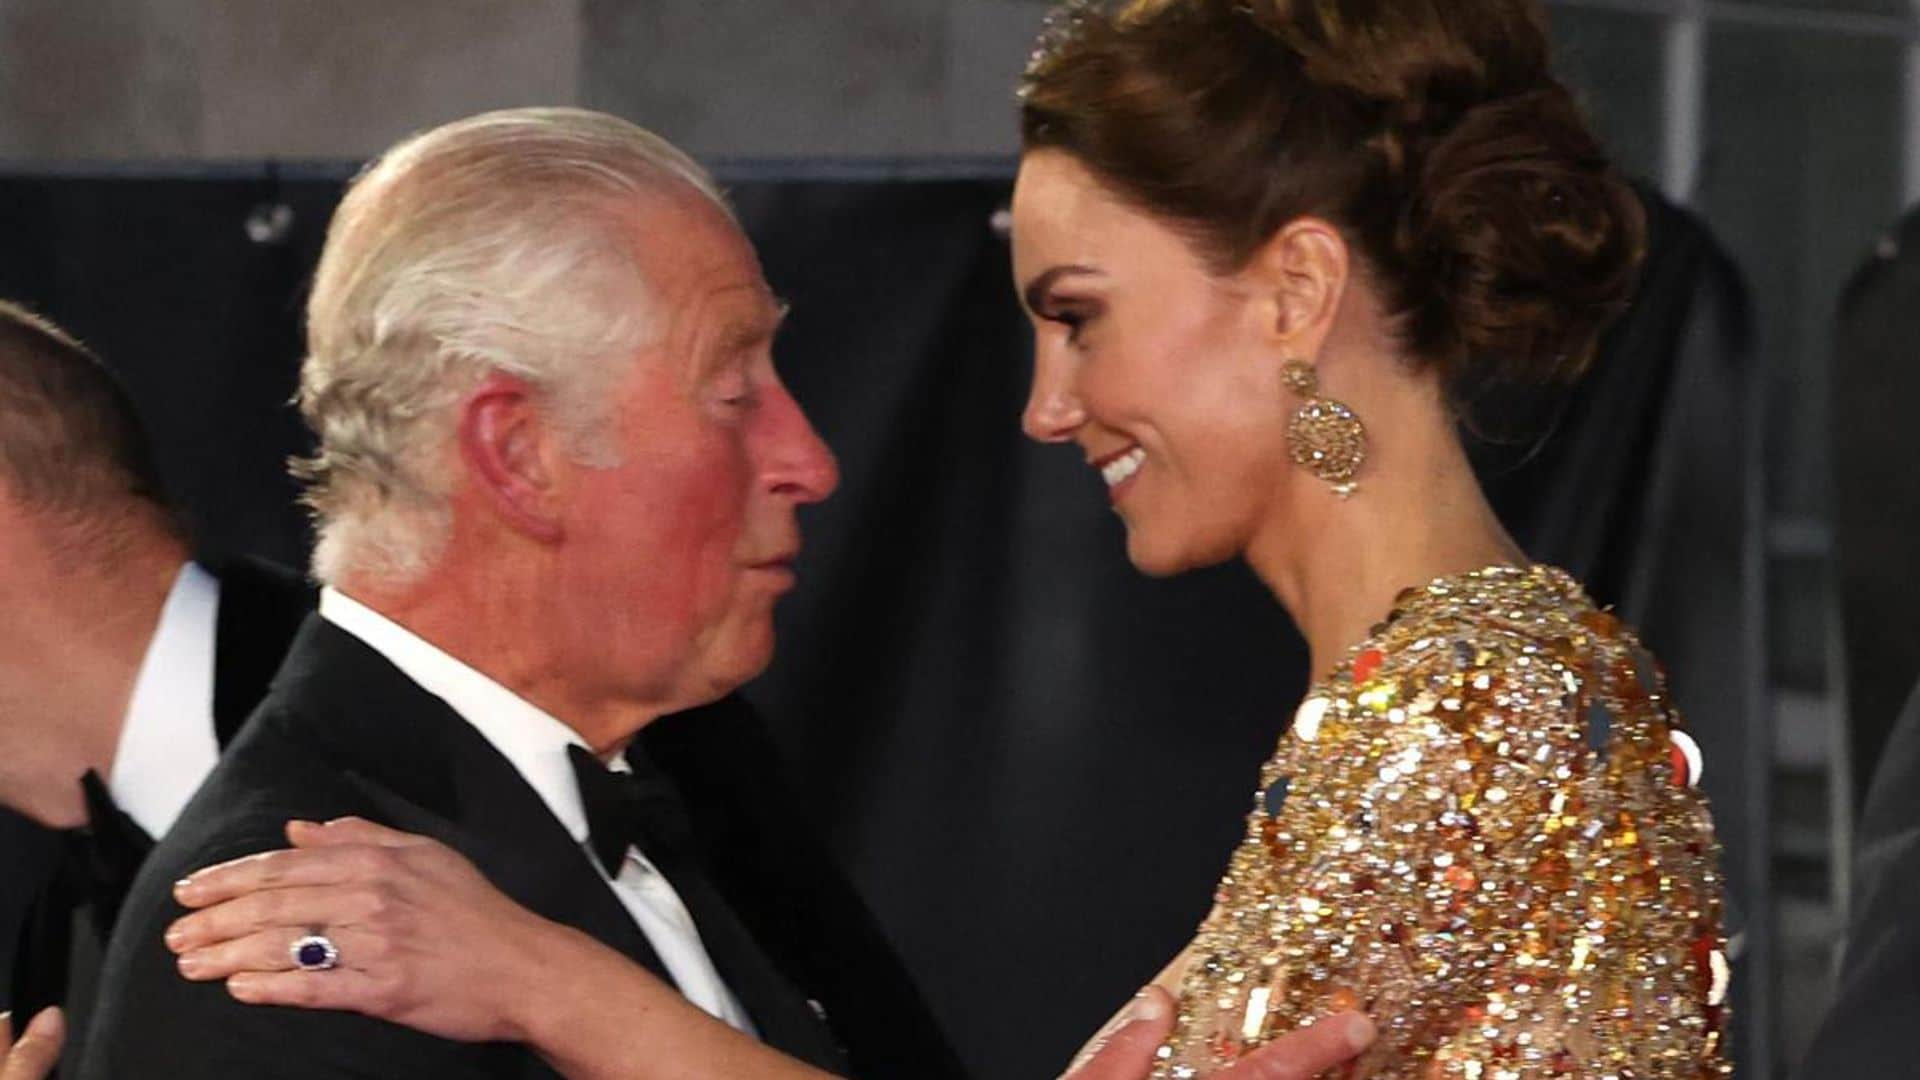 King Charles calls the Princess of Wales his ‘beloved daughter-in-law’